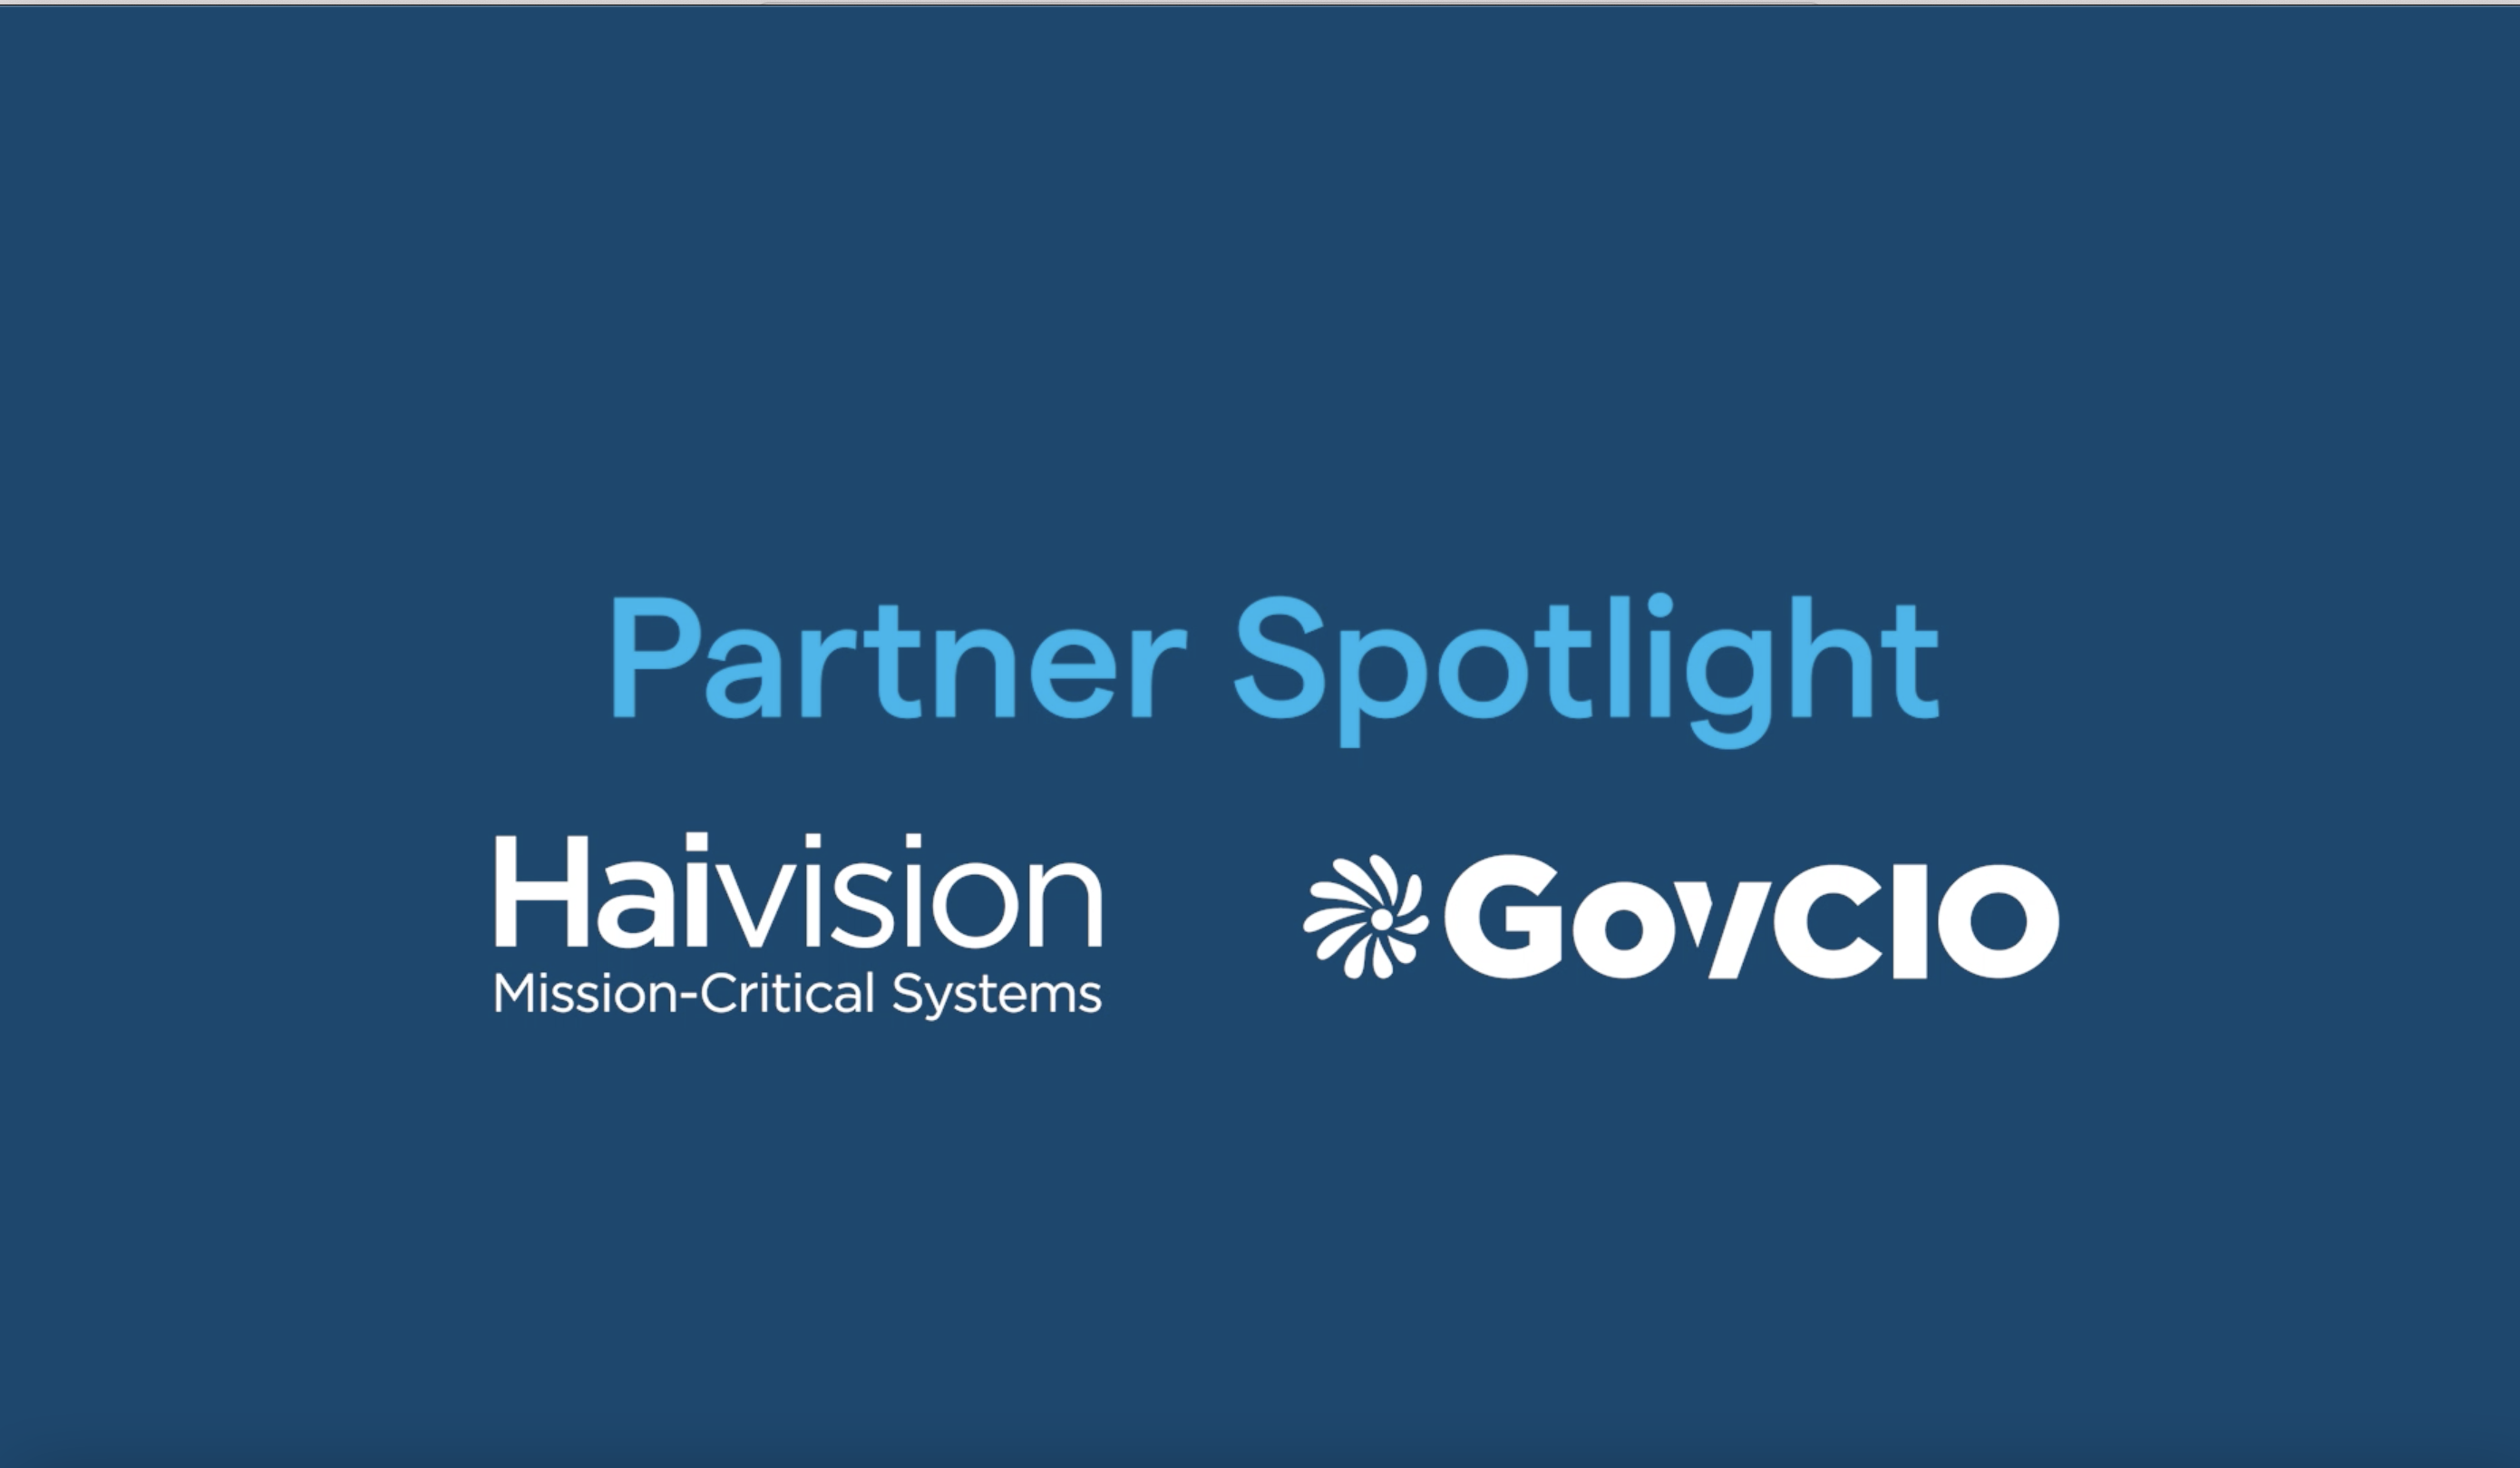 Blue block with the words "Partner spotlight" and the logos for Haivision and GovCIO side by side.